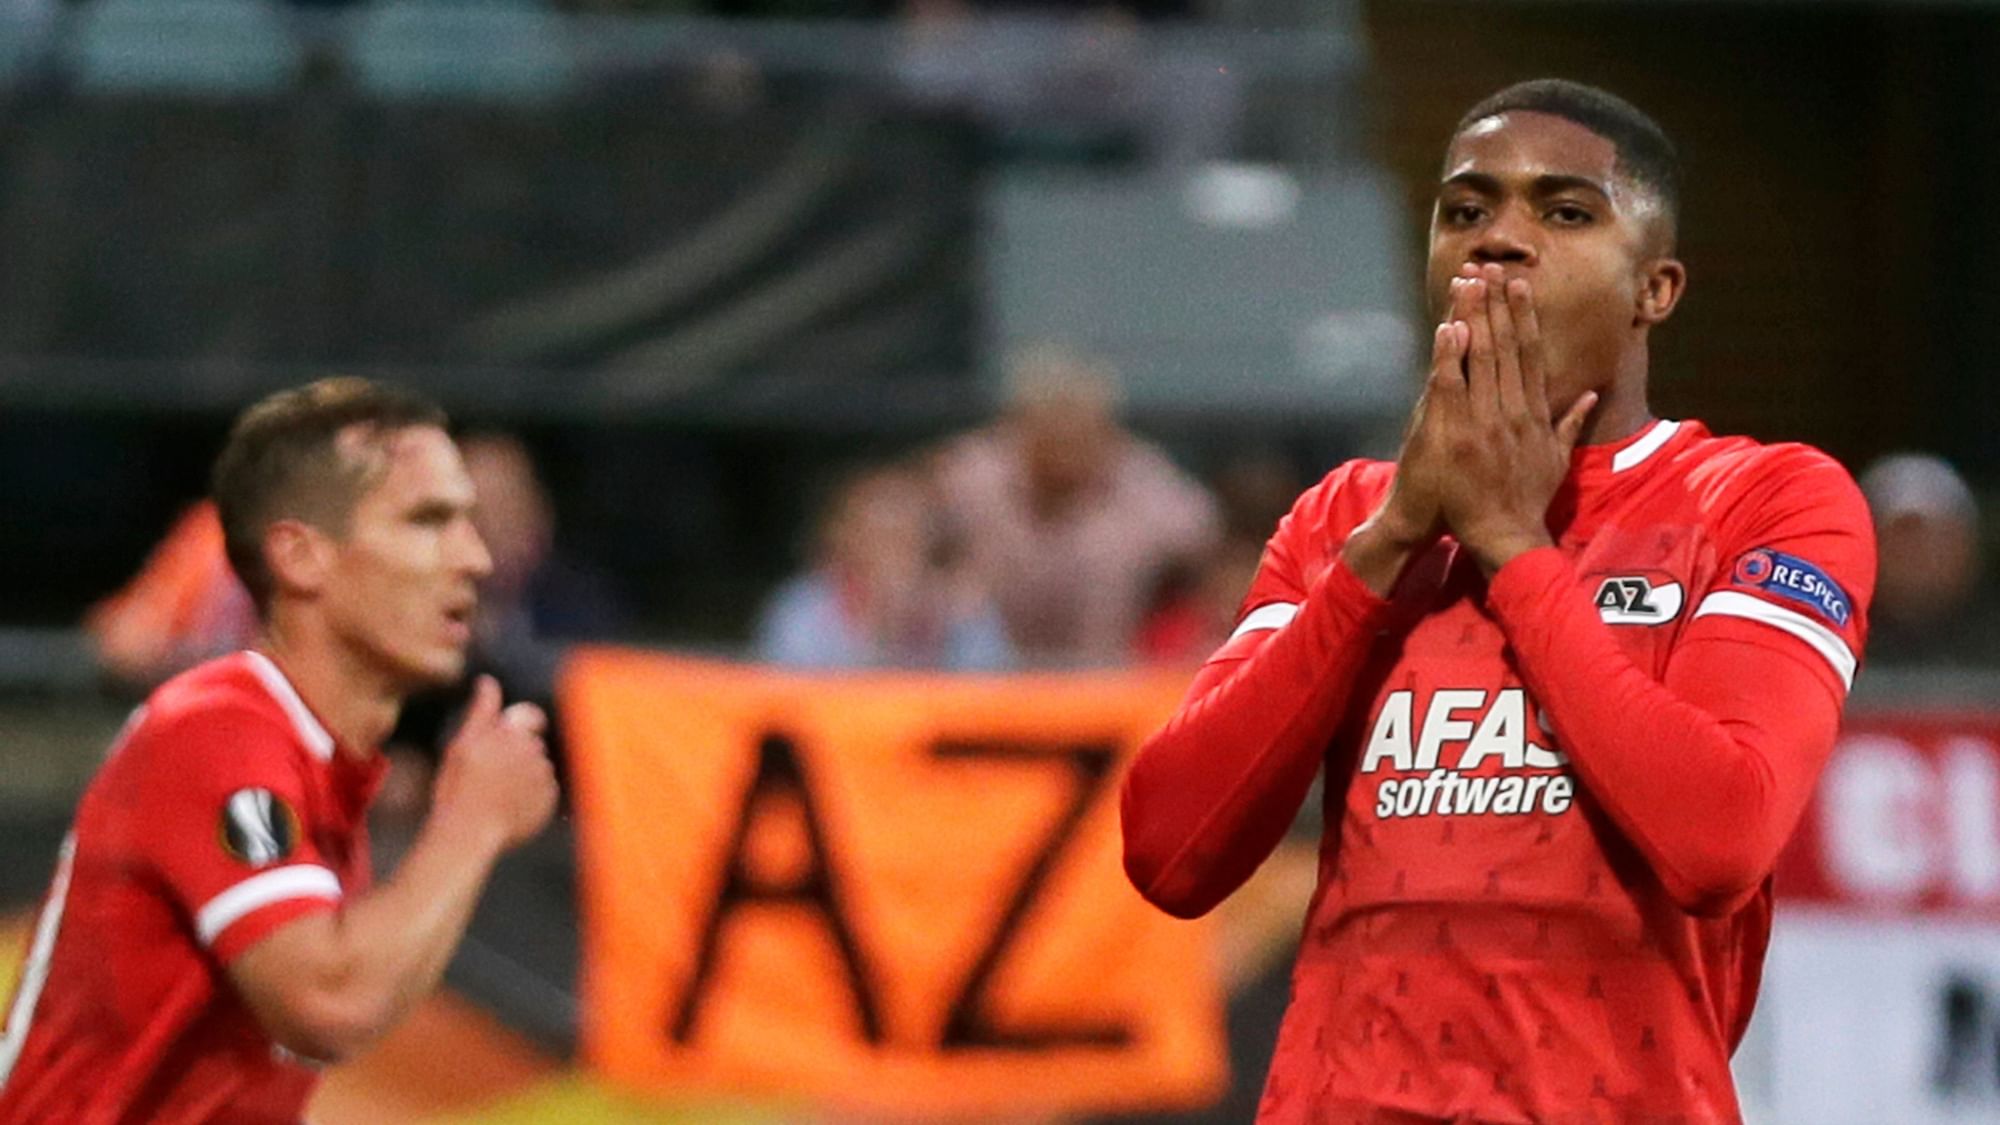 Alkmaar’s Myron Boadu, right, reacts after his goal was disallowed for offside during the group L Europa League soccer match between AZ Alkmaar and Manchester United at the ADO Den Haag stadium in The Hague.